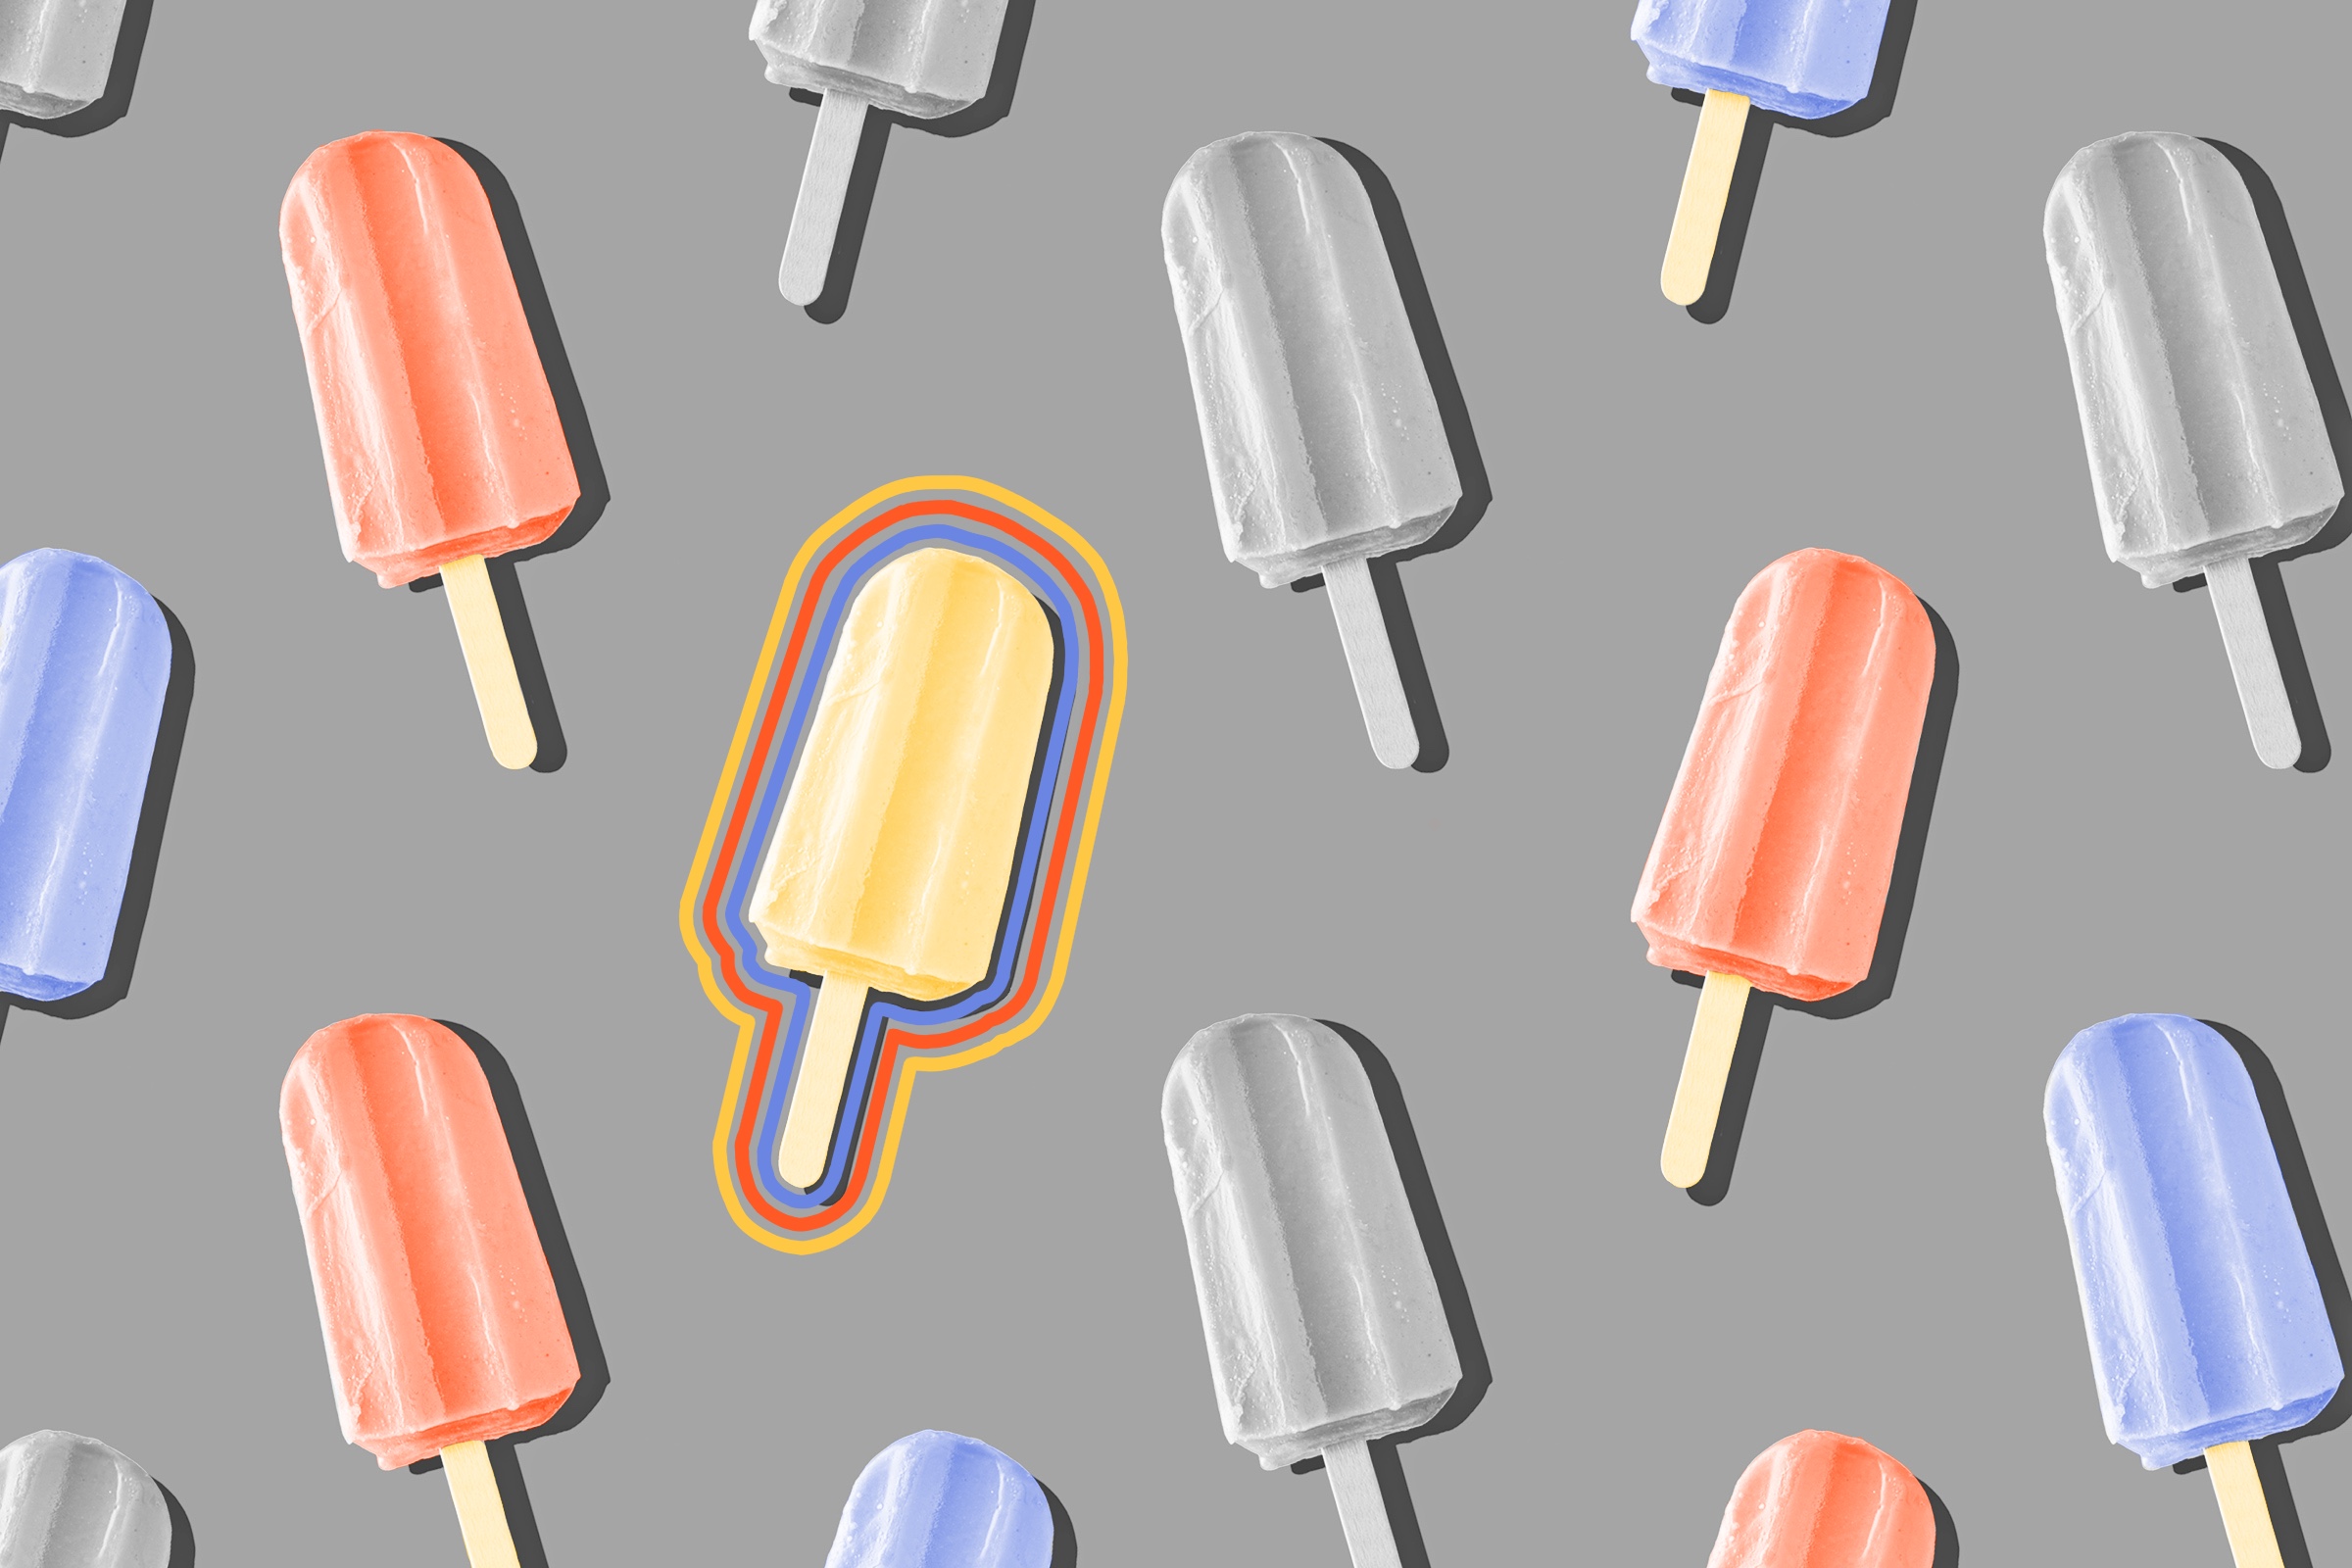 Popsicles were reportedly invented by an 11-year-old.